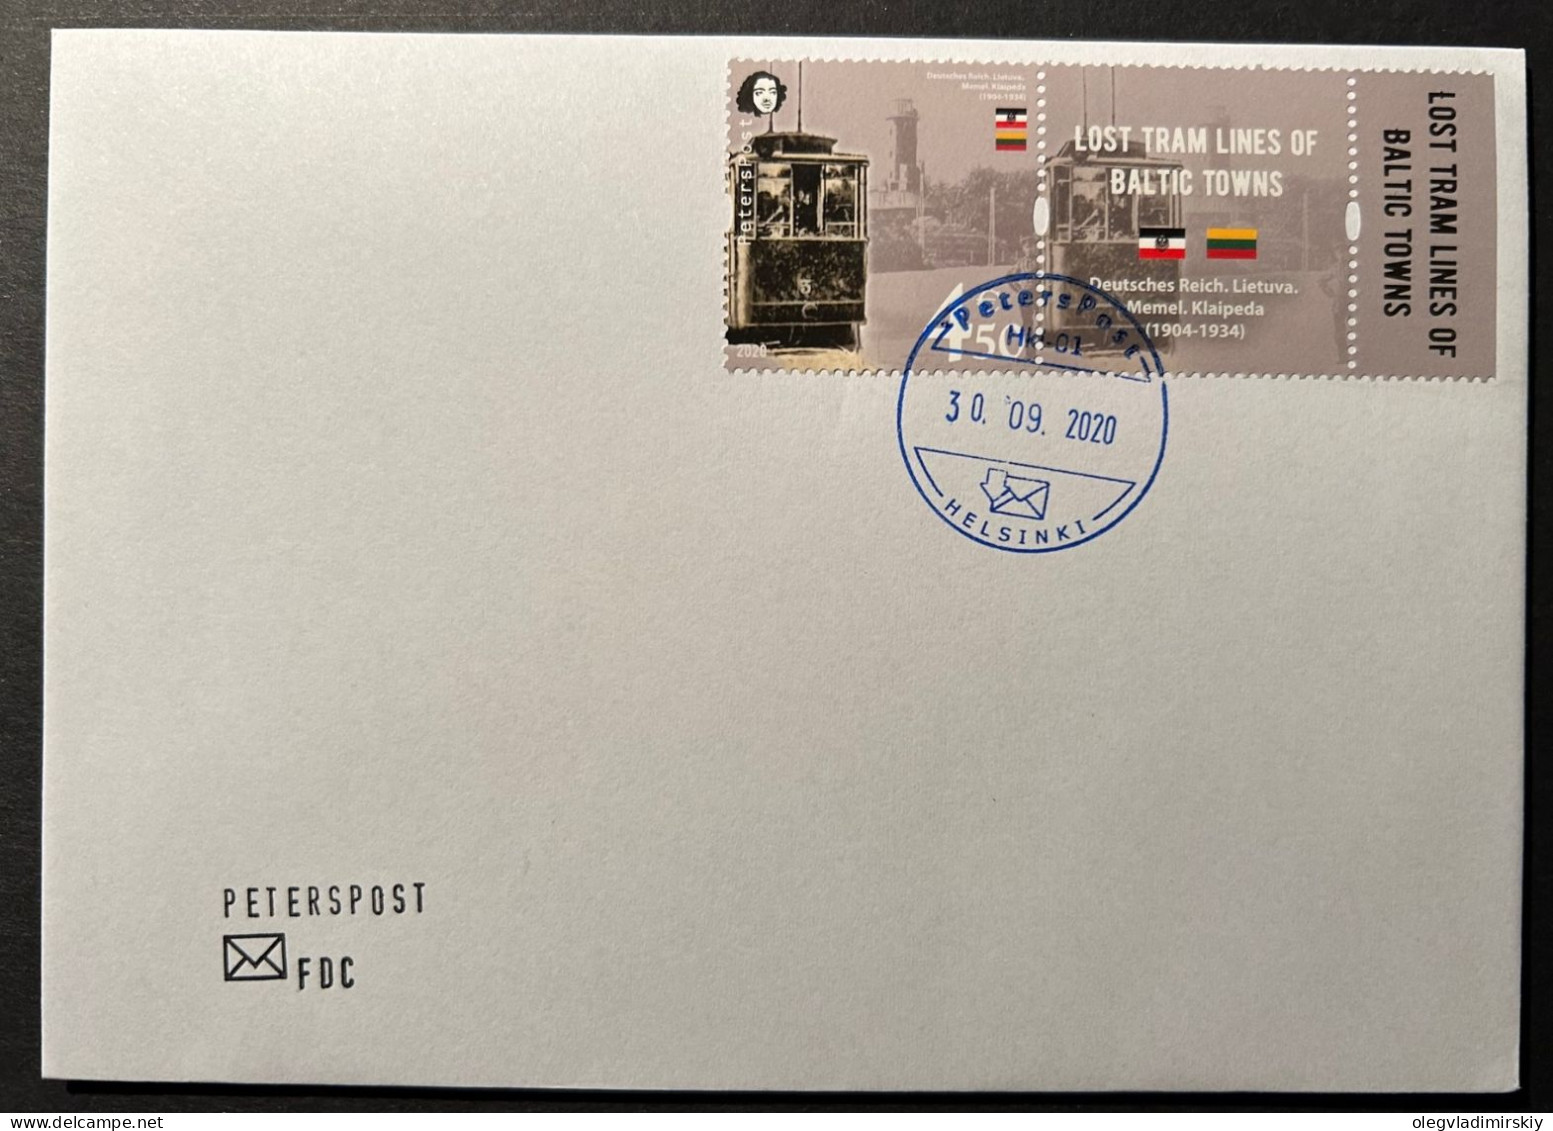 Finland Finnland Finlande 2020 Lost Tram Lines Of Baltic Klaipeda Memel Lighthouse Peterspost FDC With Label - Tramways